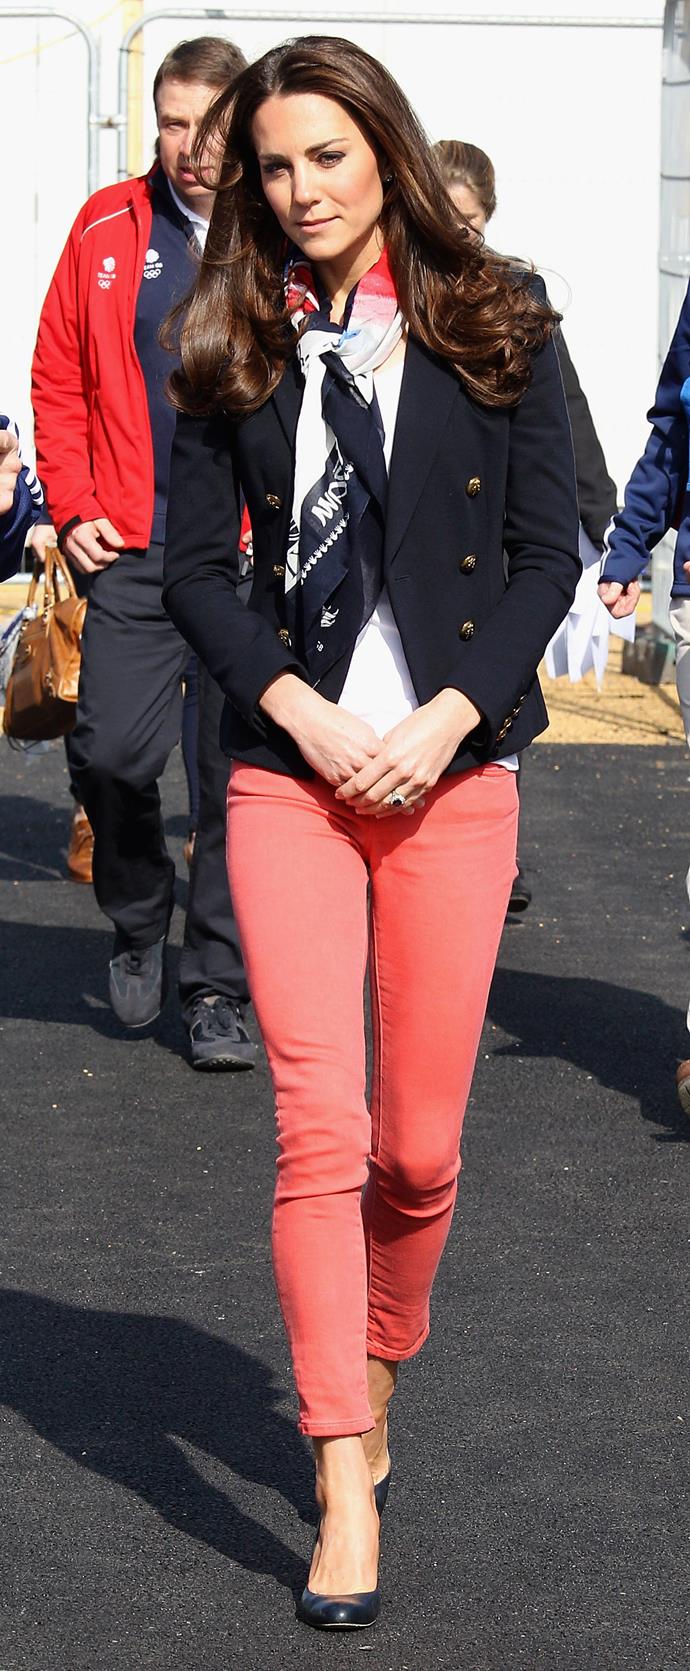 In 2012, Duchess Catherine stepped out to meet members of the British hockey team in a pair of *very* loud red skinny jeans. That's one way to make a statement!